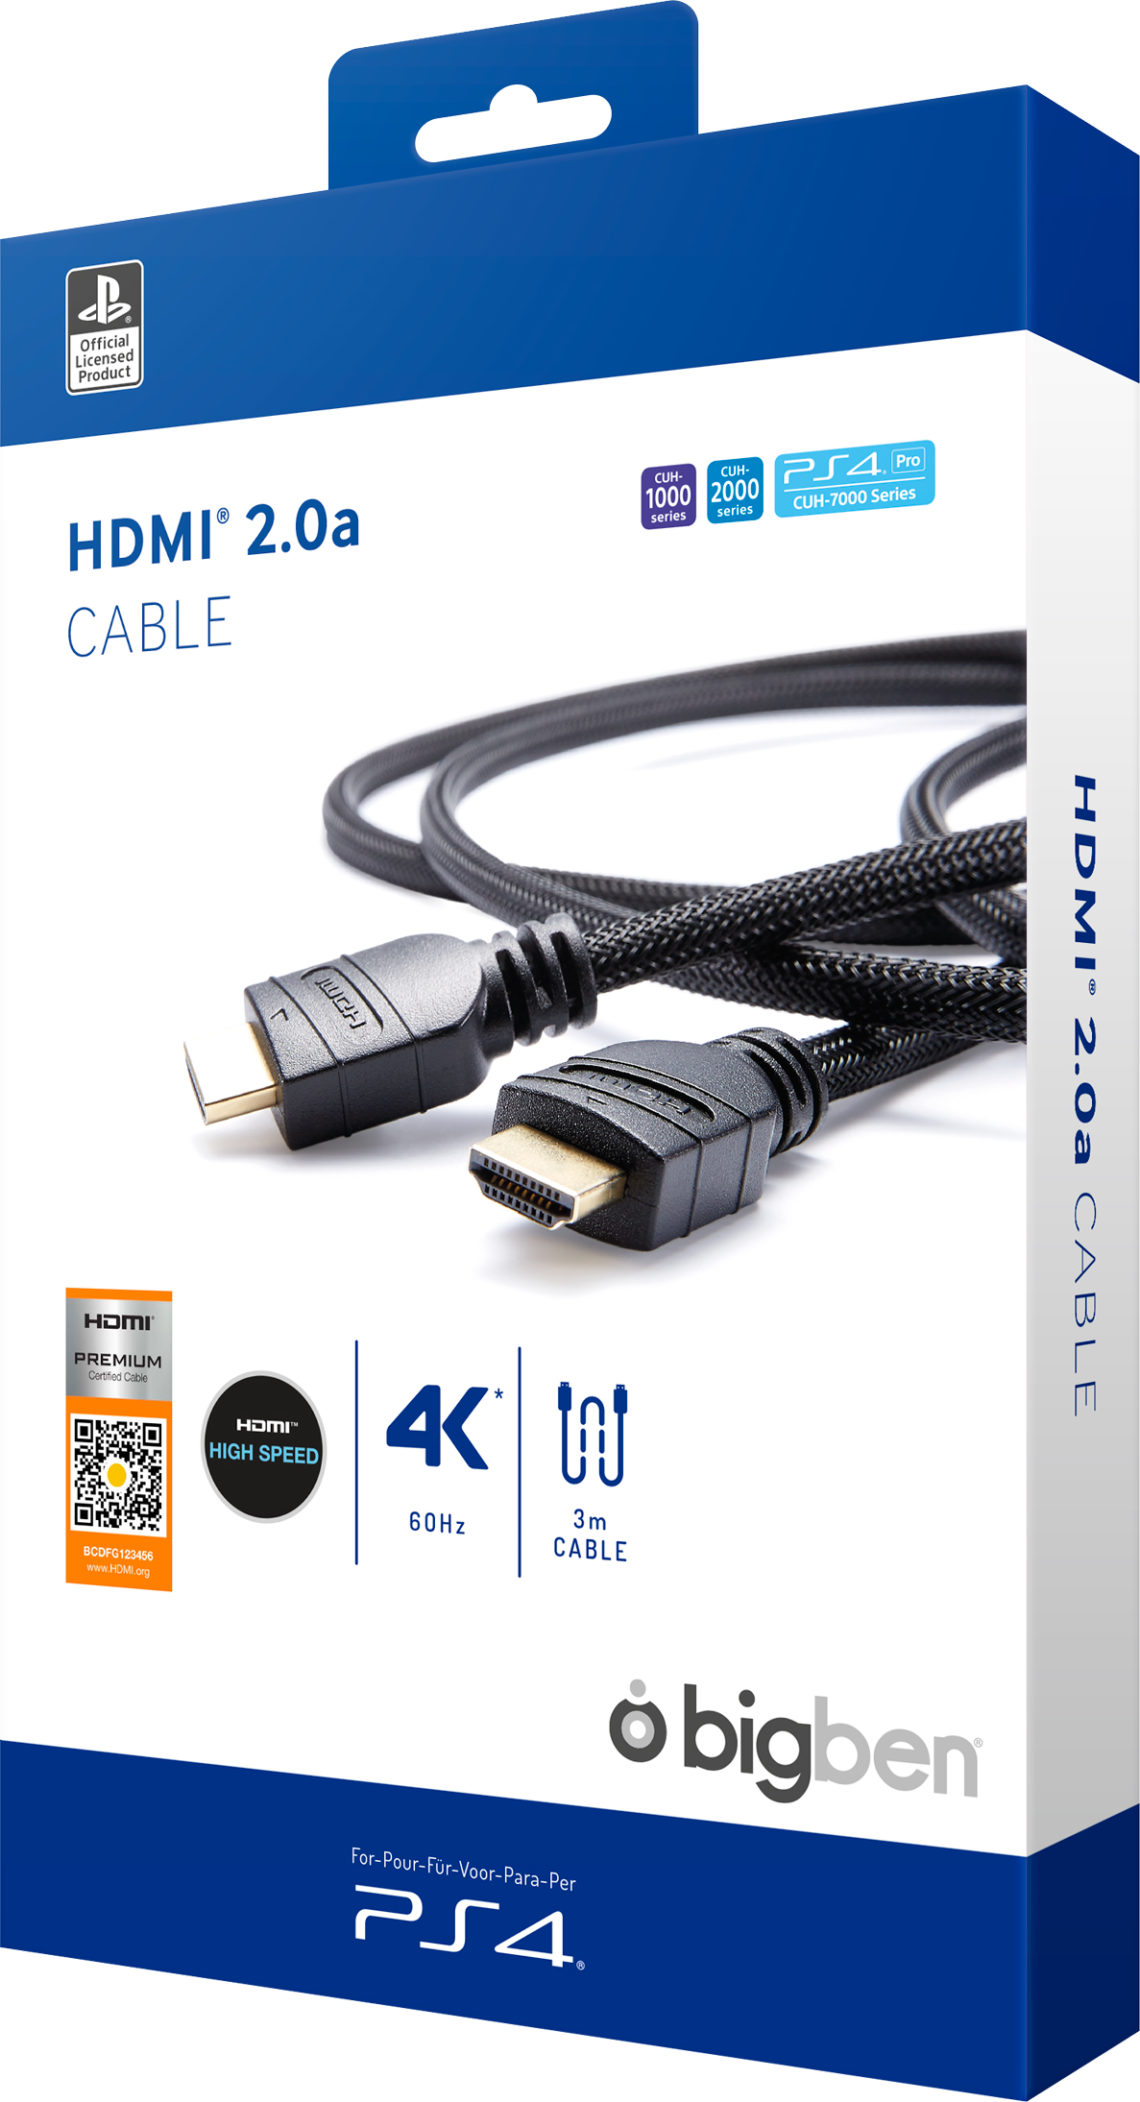 HDMI® 2.0A cable for 4K* ready systems 